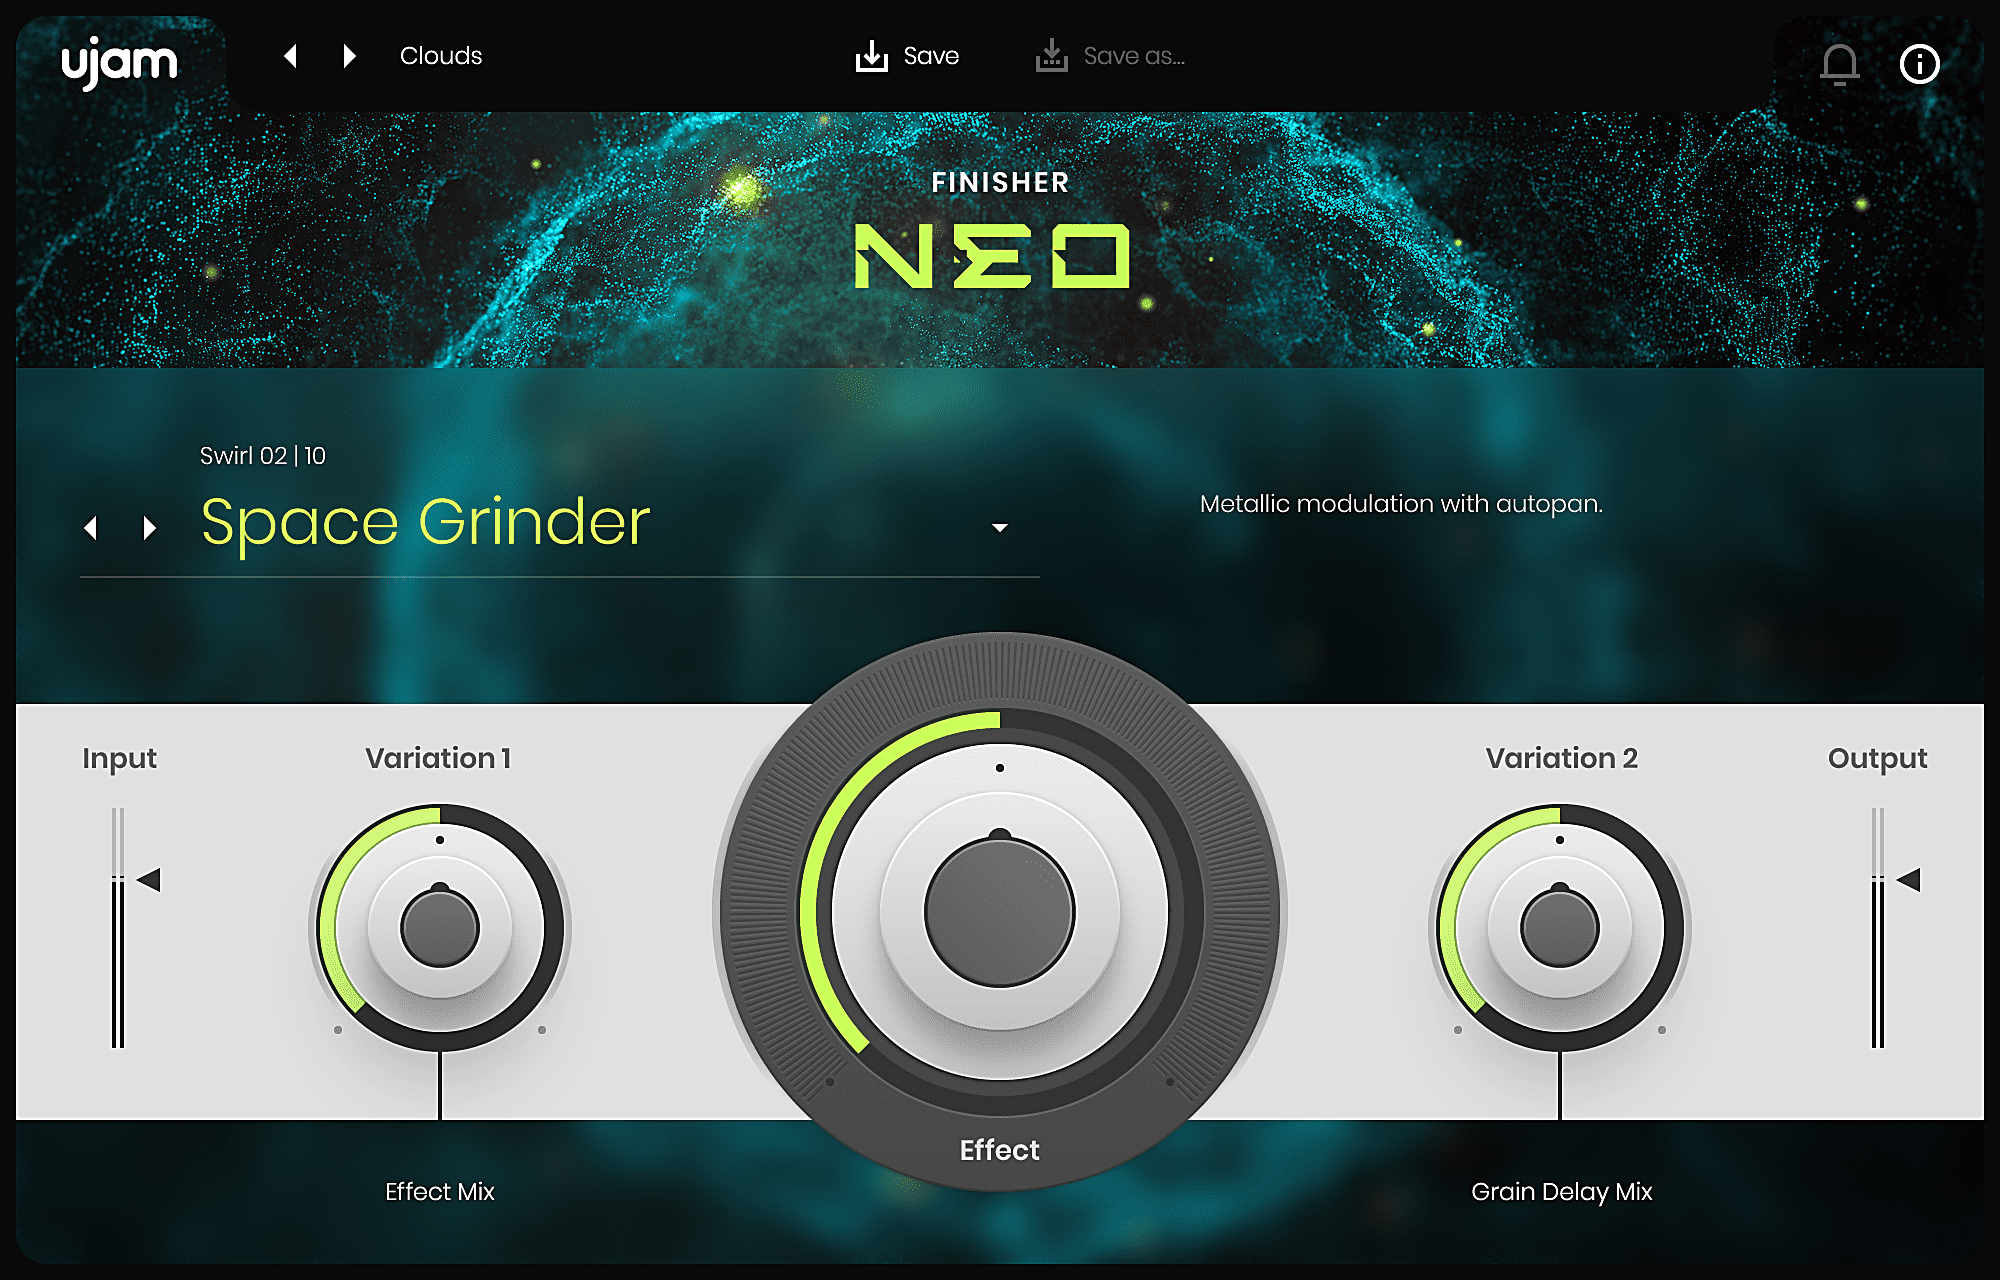 UJAM Releases Finisher NEO